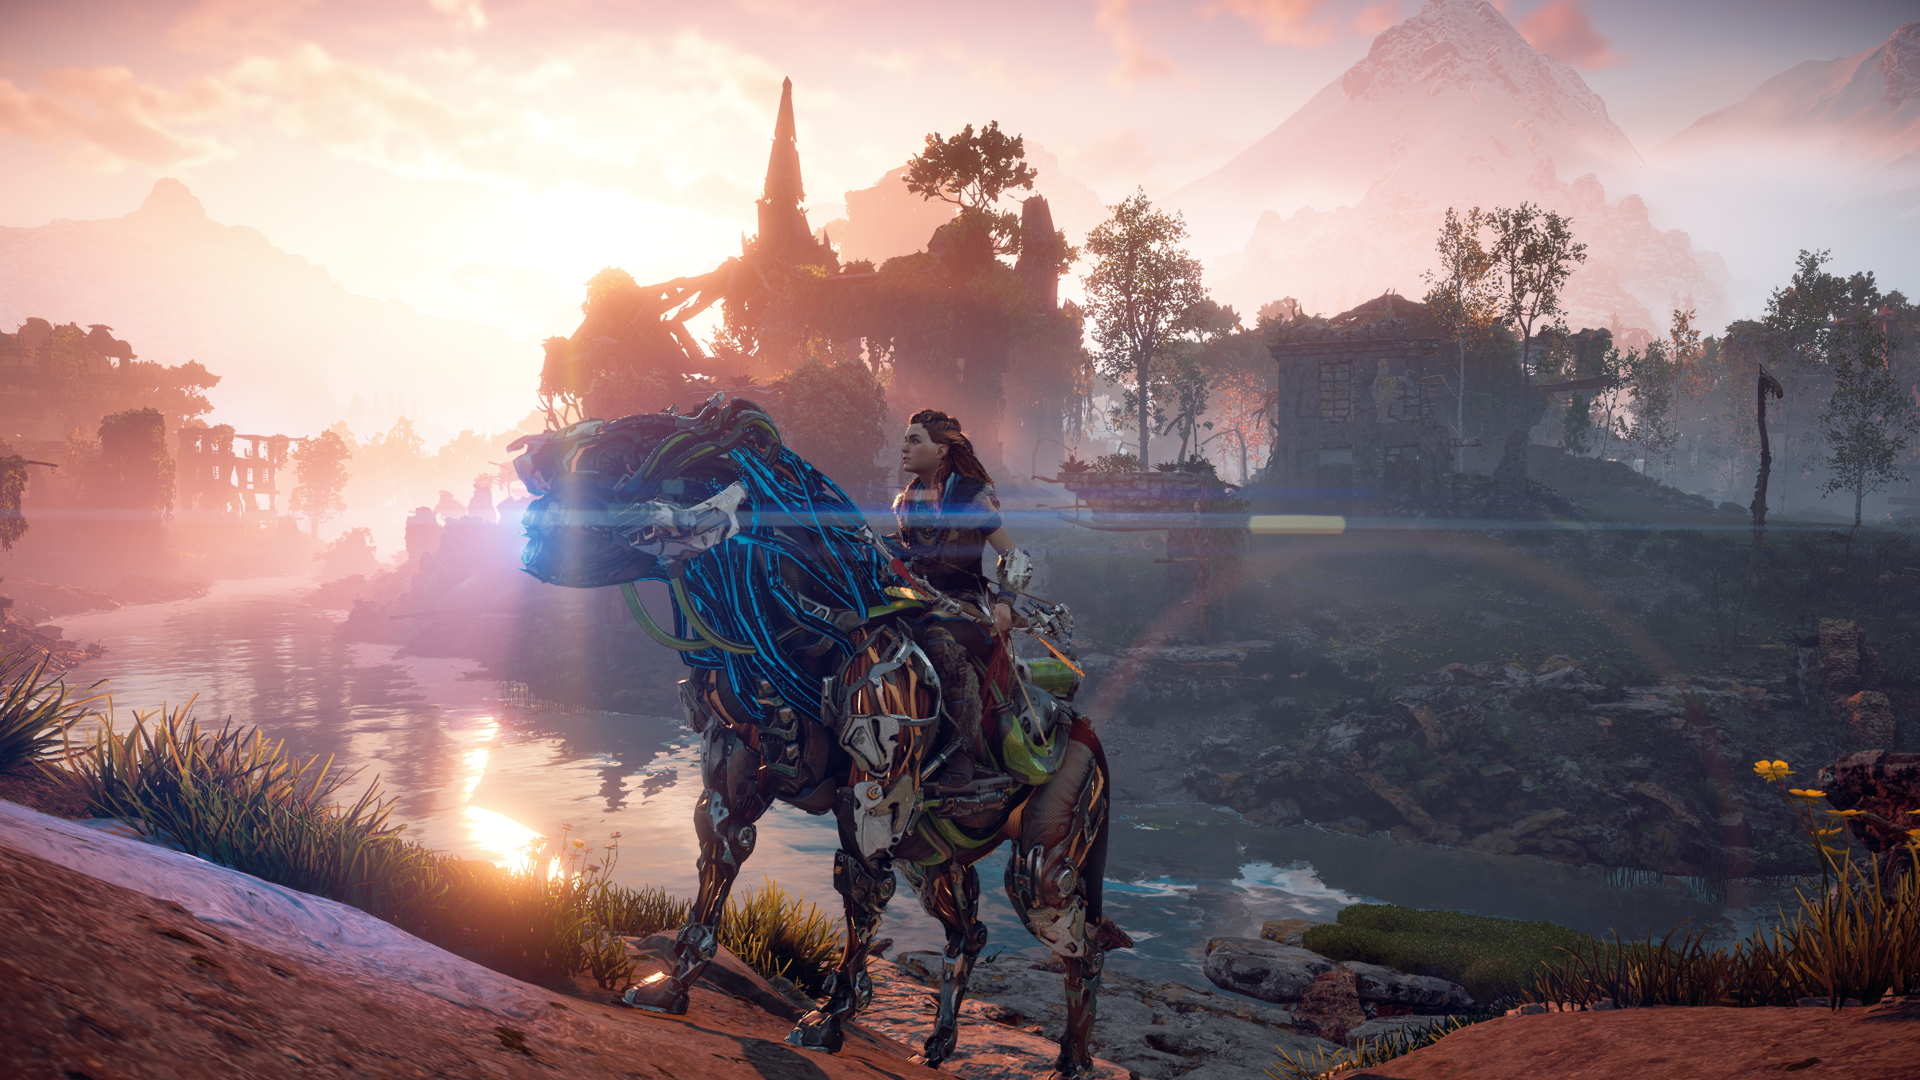 Aloy on a machine mount, as the sun rises on some ruins and a river.